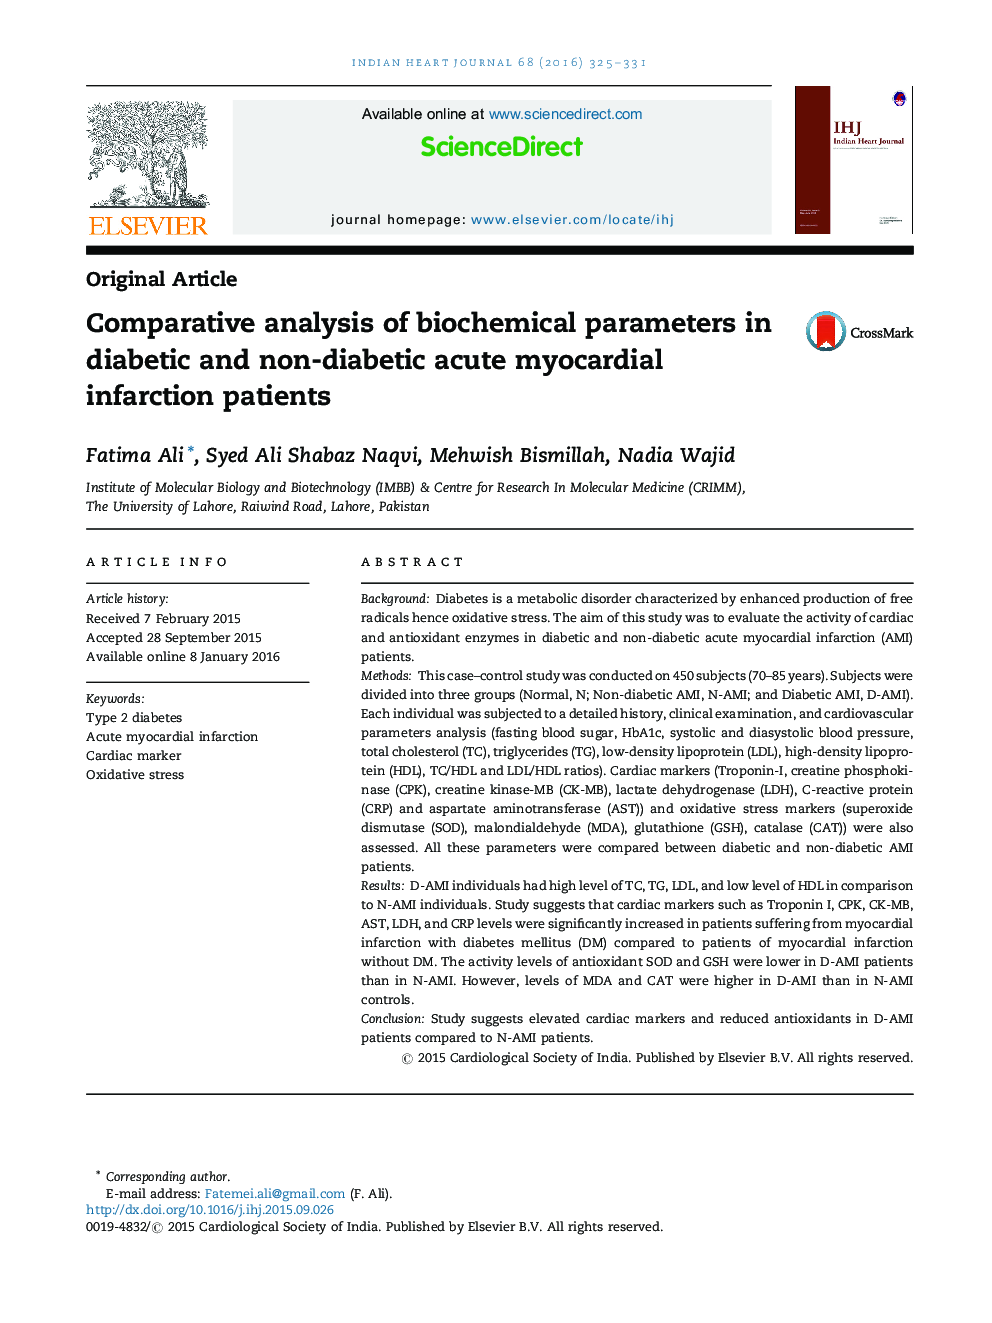 Comparative analysis of biochemical parameters in diabetic and non-diabetic acute myocardial infarction patients